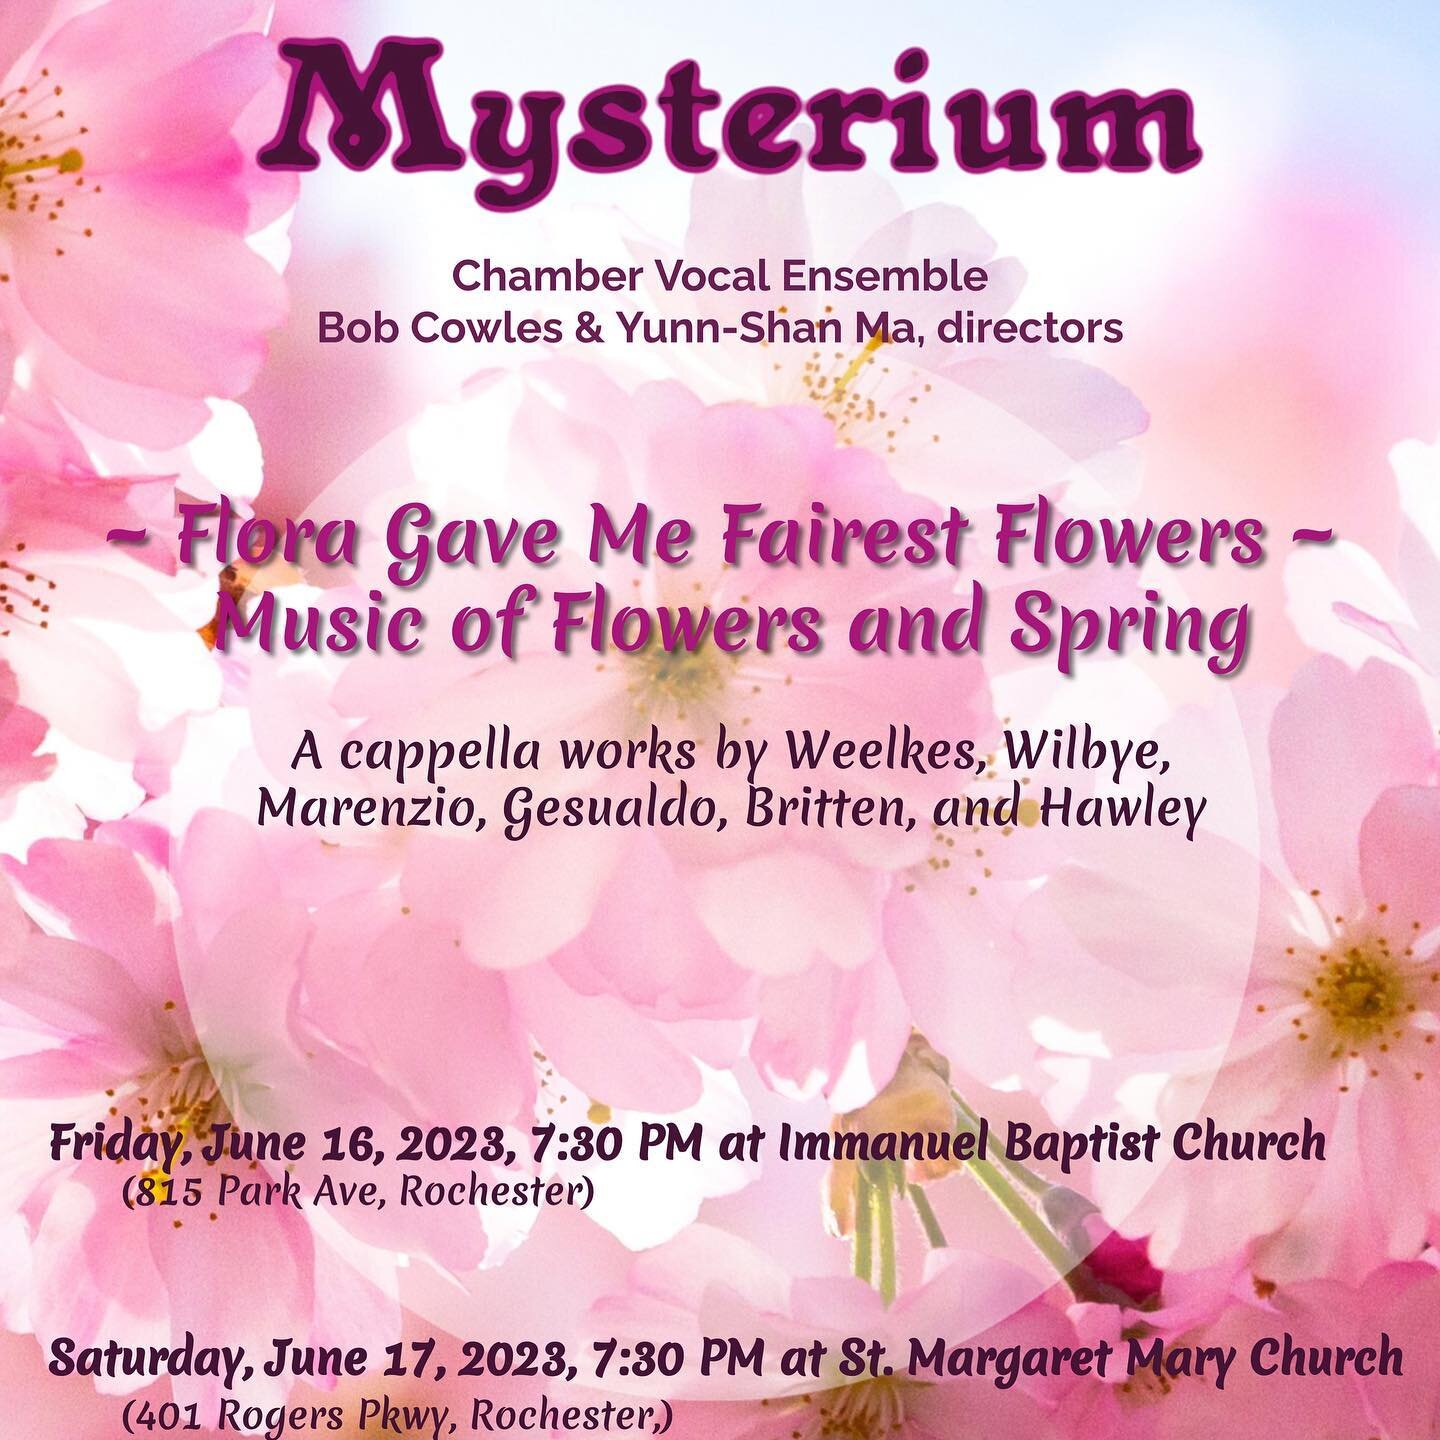 Time for concert #3 of this week! 🥳 Come hear some beautiful choral music tonight at 7:30! I&rsquo;ve enjoyed working with these wonderful singers. We&rsquo;re excited to present this program!
.
#mysterium #choralmusic #choralrepertoire #choralconce